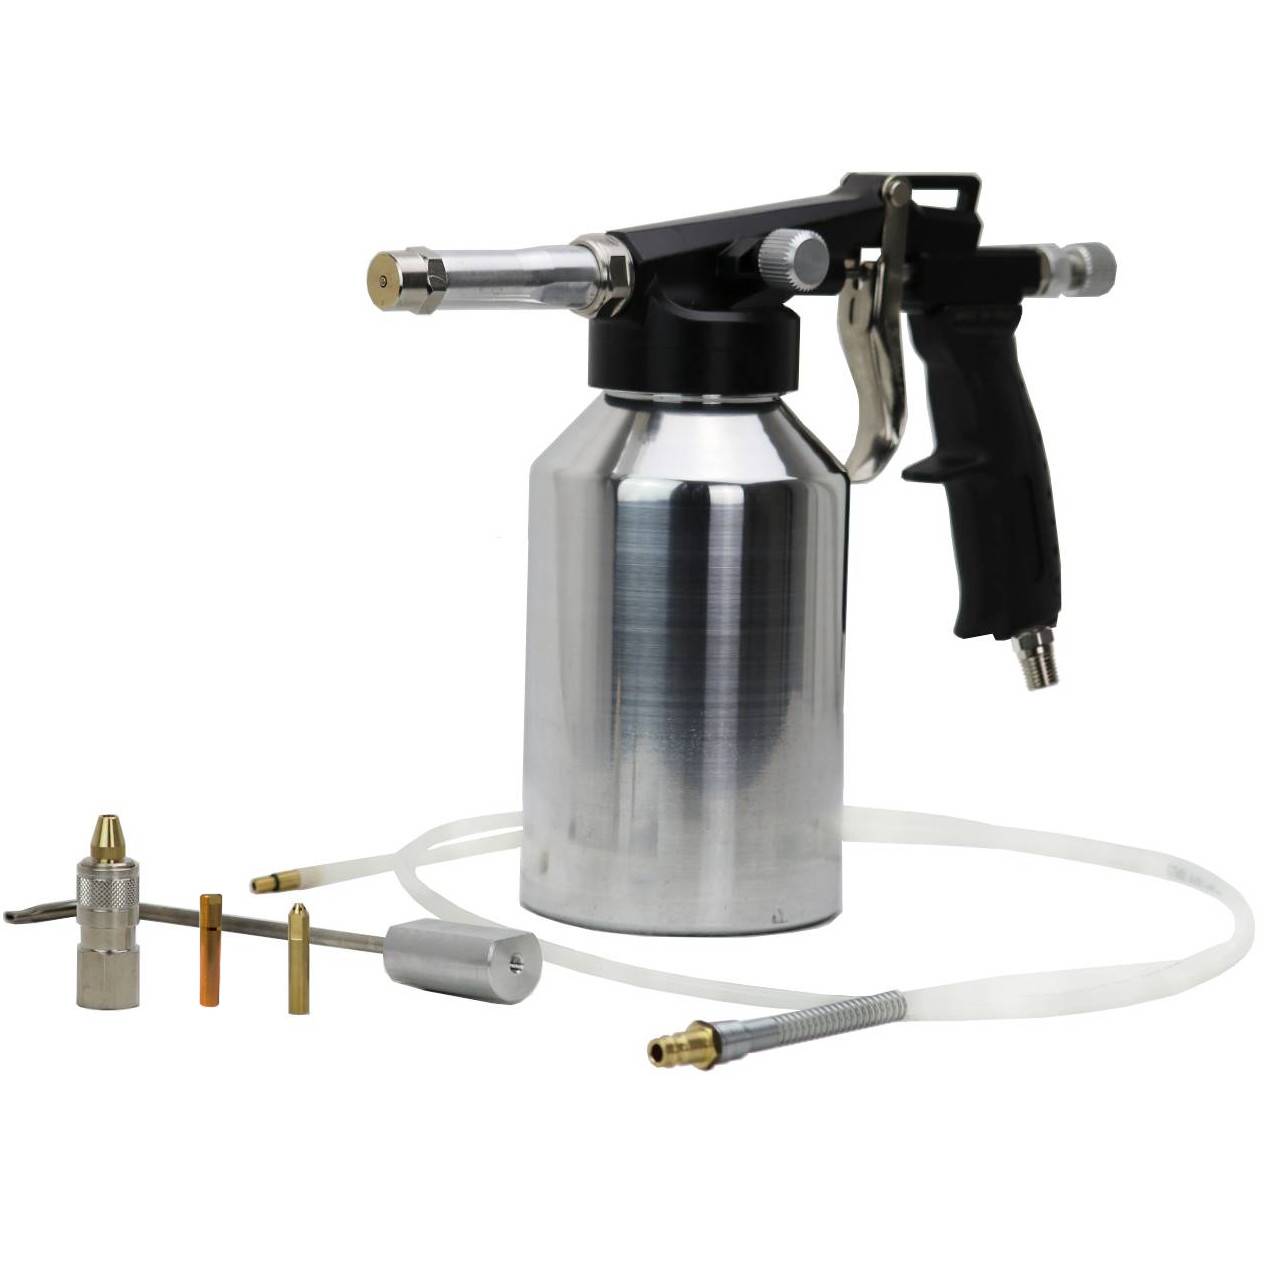 Air Rust Proofing & Undercoating Spray Gun W/ Gauge & Wand 2-Styles For Cars